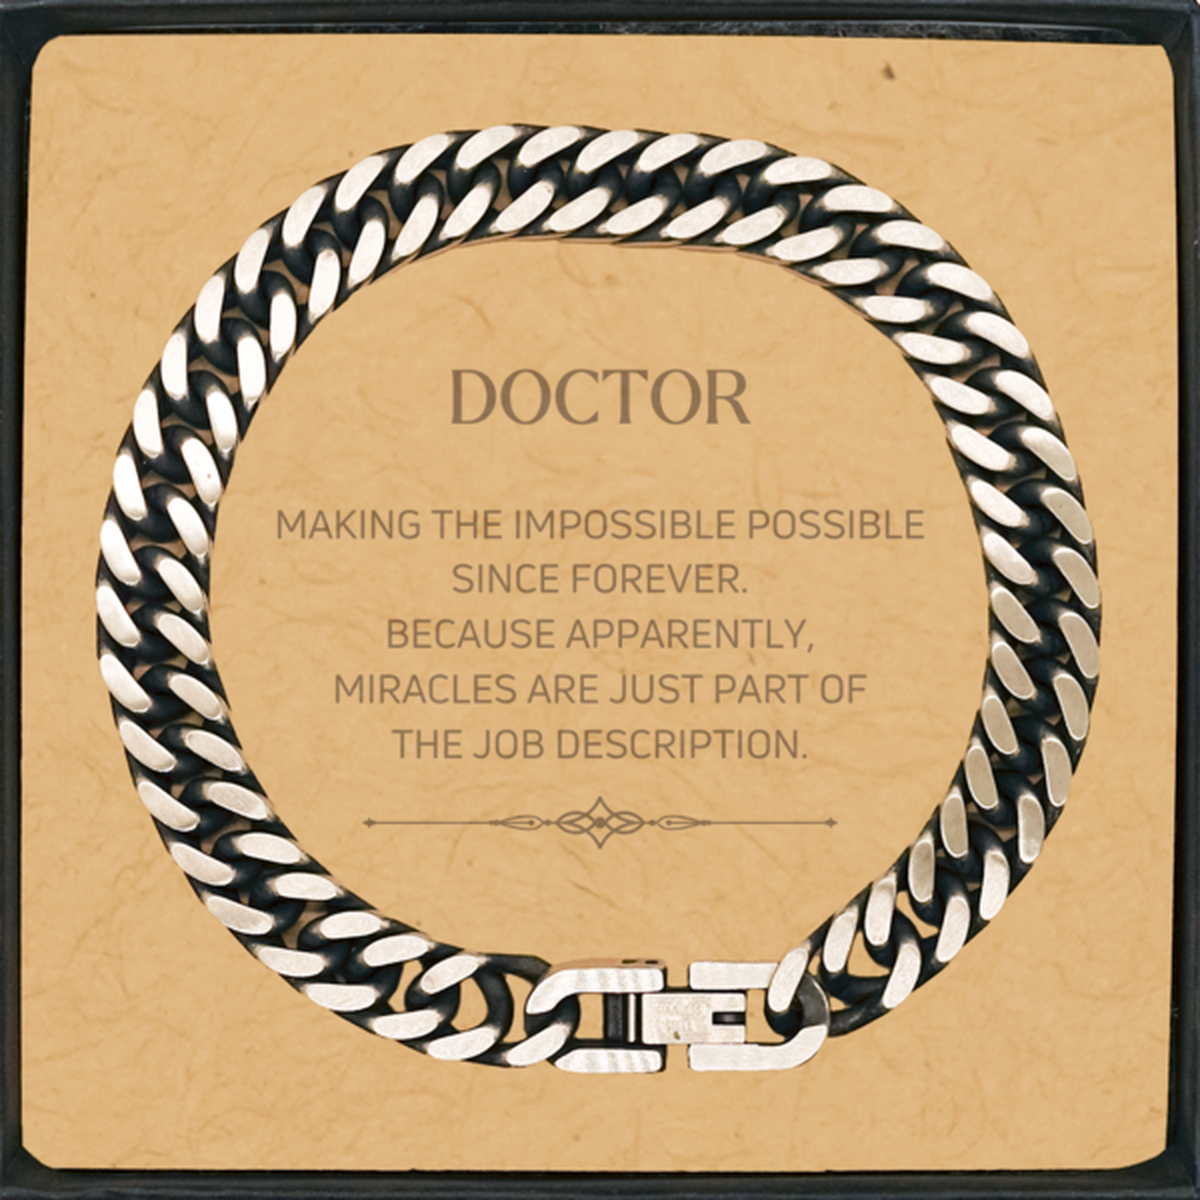 Funny Doctor Gifts, Miracles are just part of the job description, Inspirational Birthday Cuban Link Chain Bracelet For Doctor, Men, Women, Coworkers, Friends, Boss